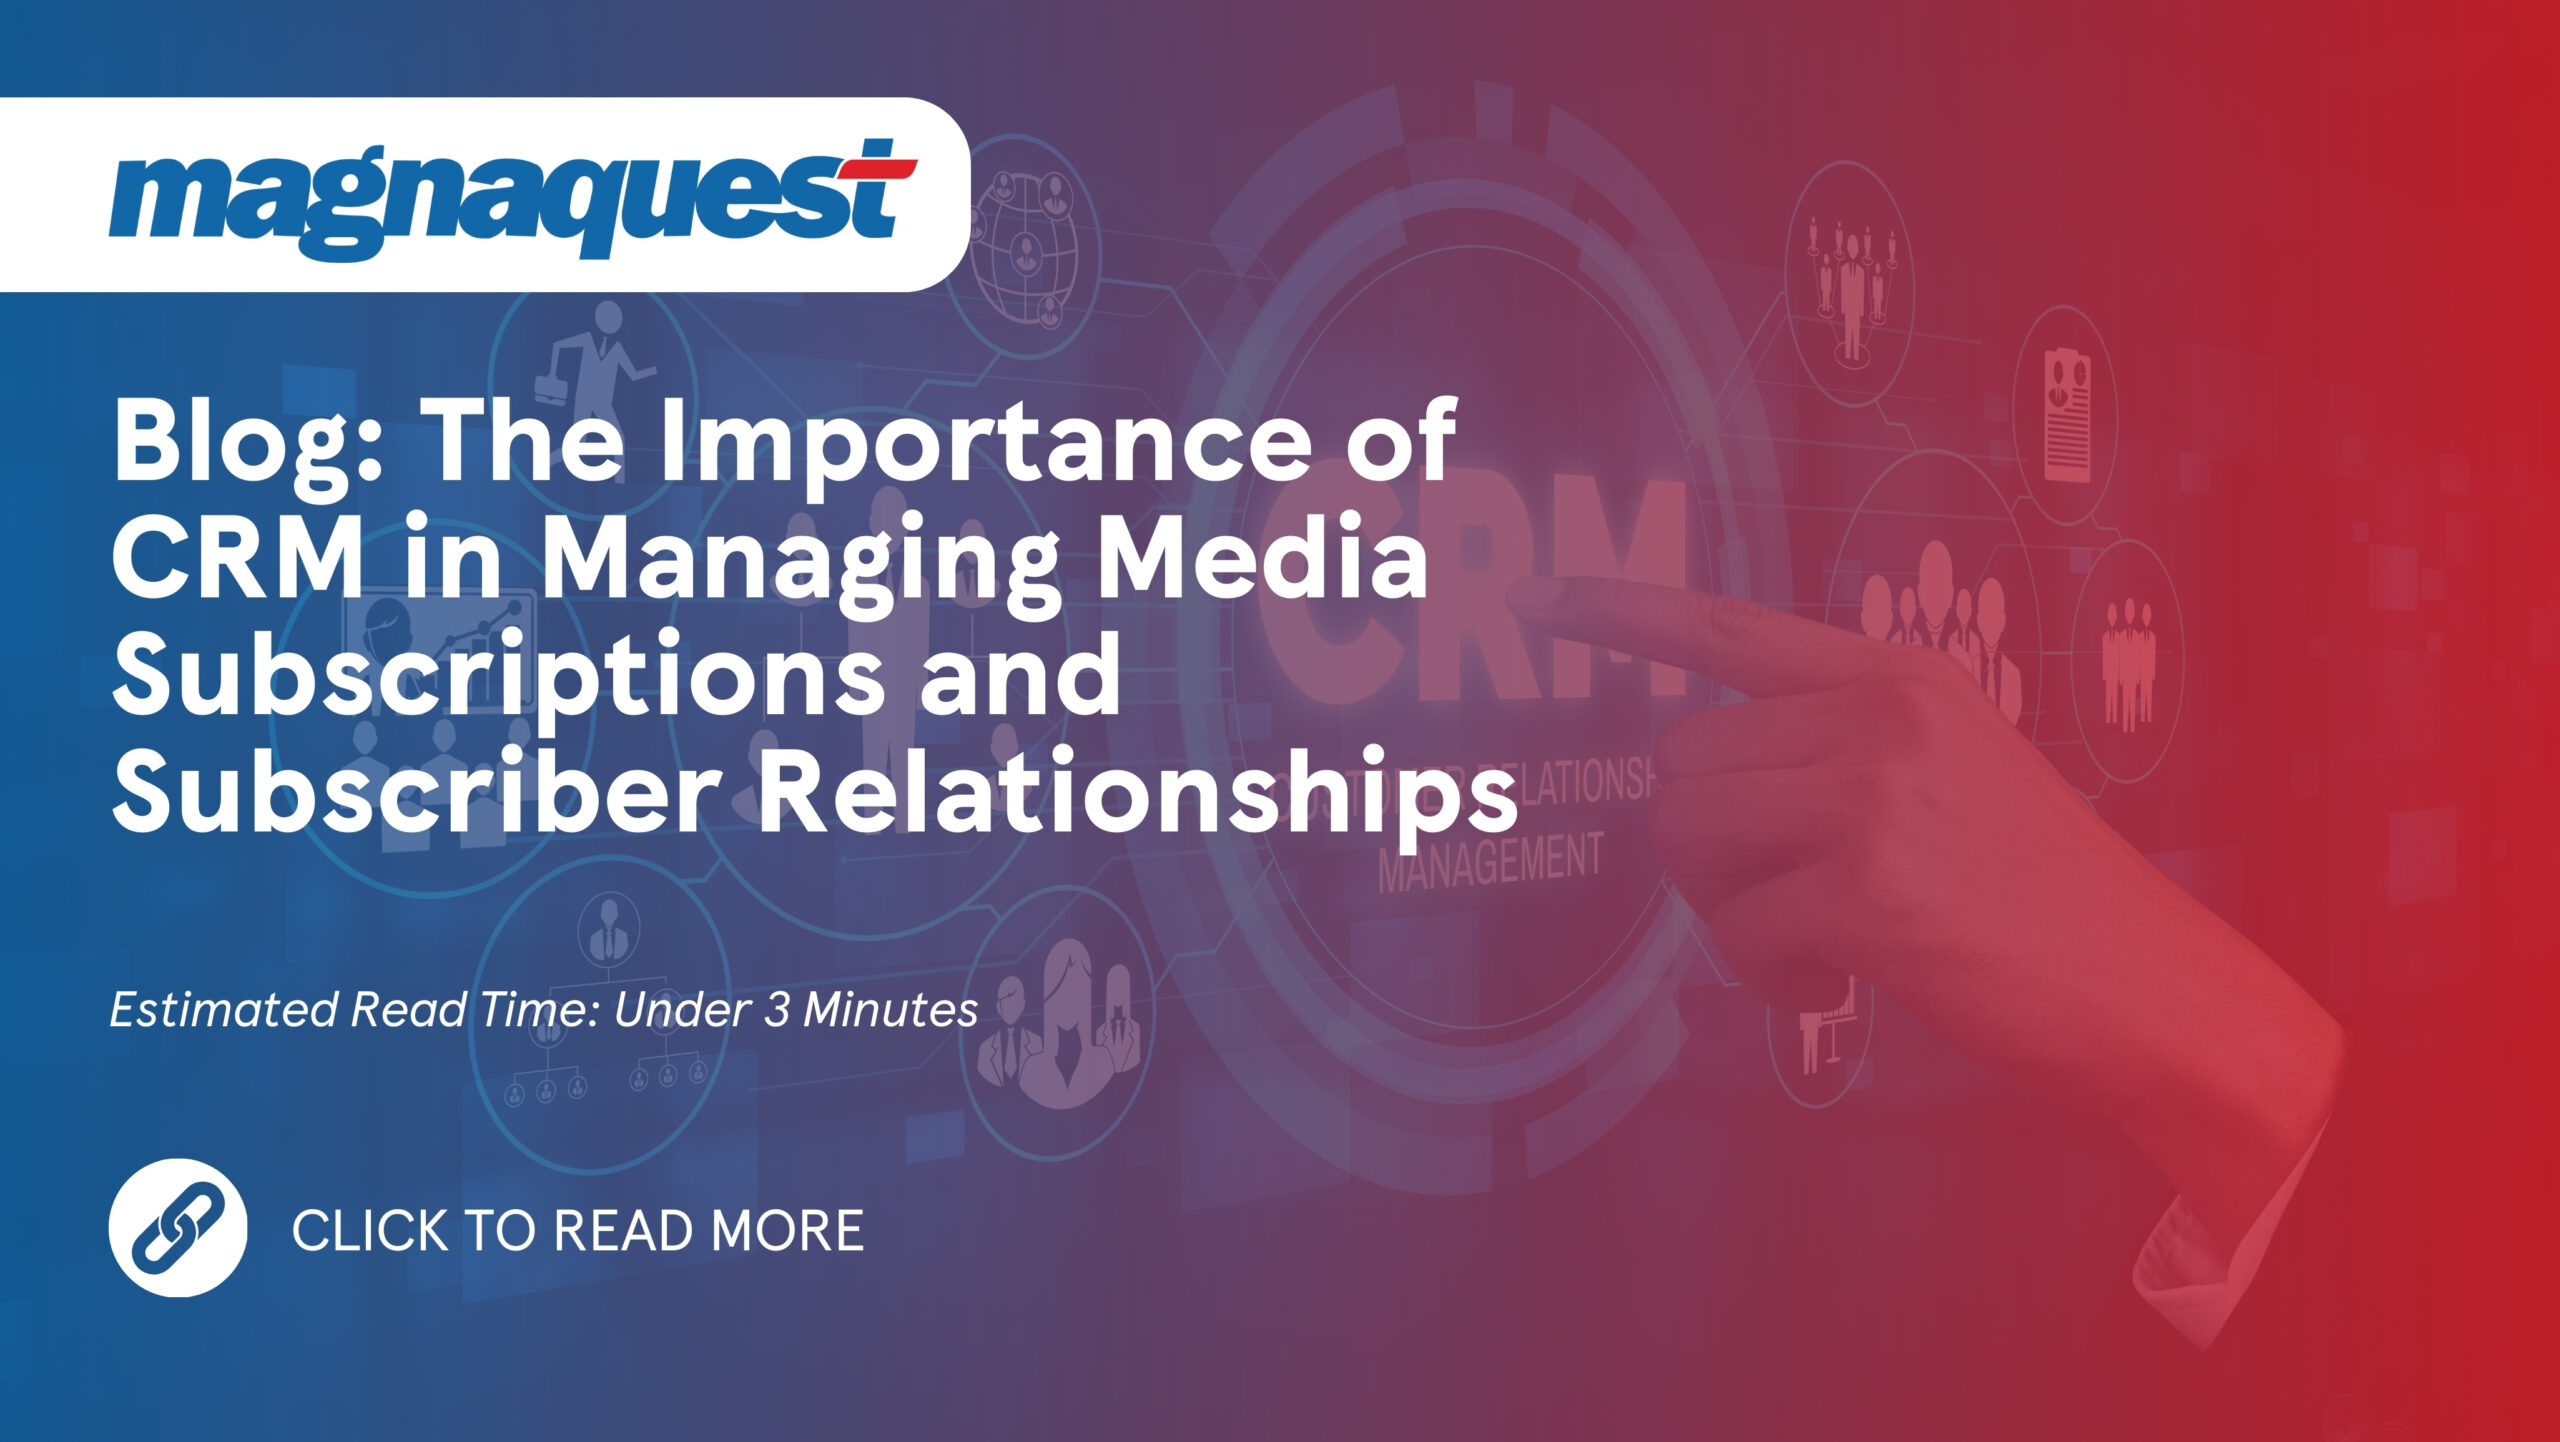 http://magnaquest.com/wp-content/uploads/2024/07/WB-The-Importance-of-CRM-in-Managing-Media-Subscriptions-and-Subscriber-Relationships-scaled.jpg